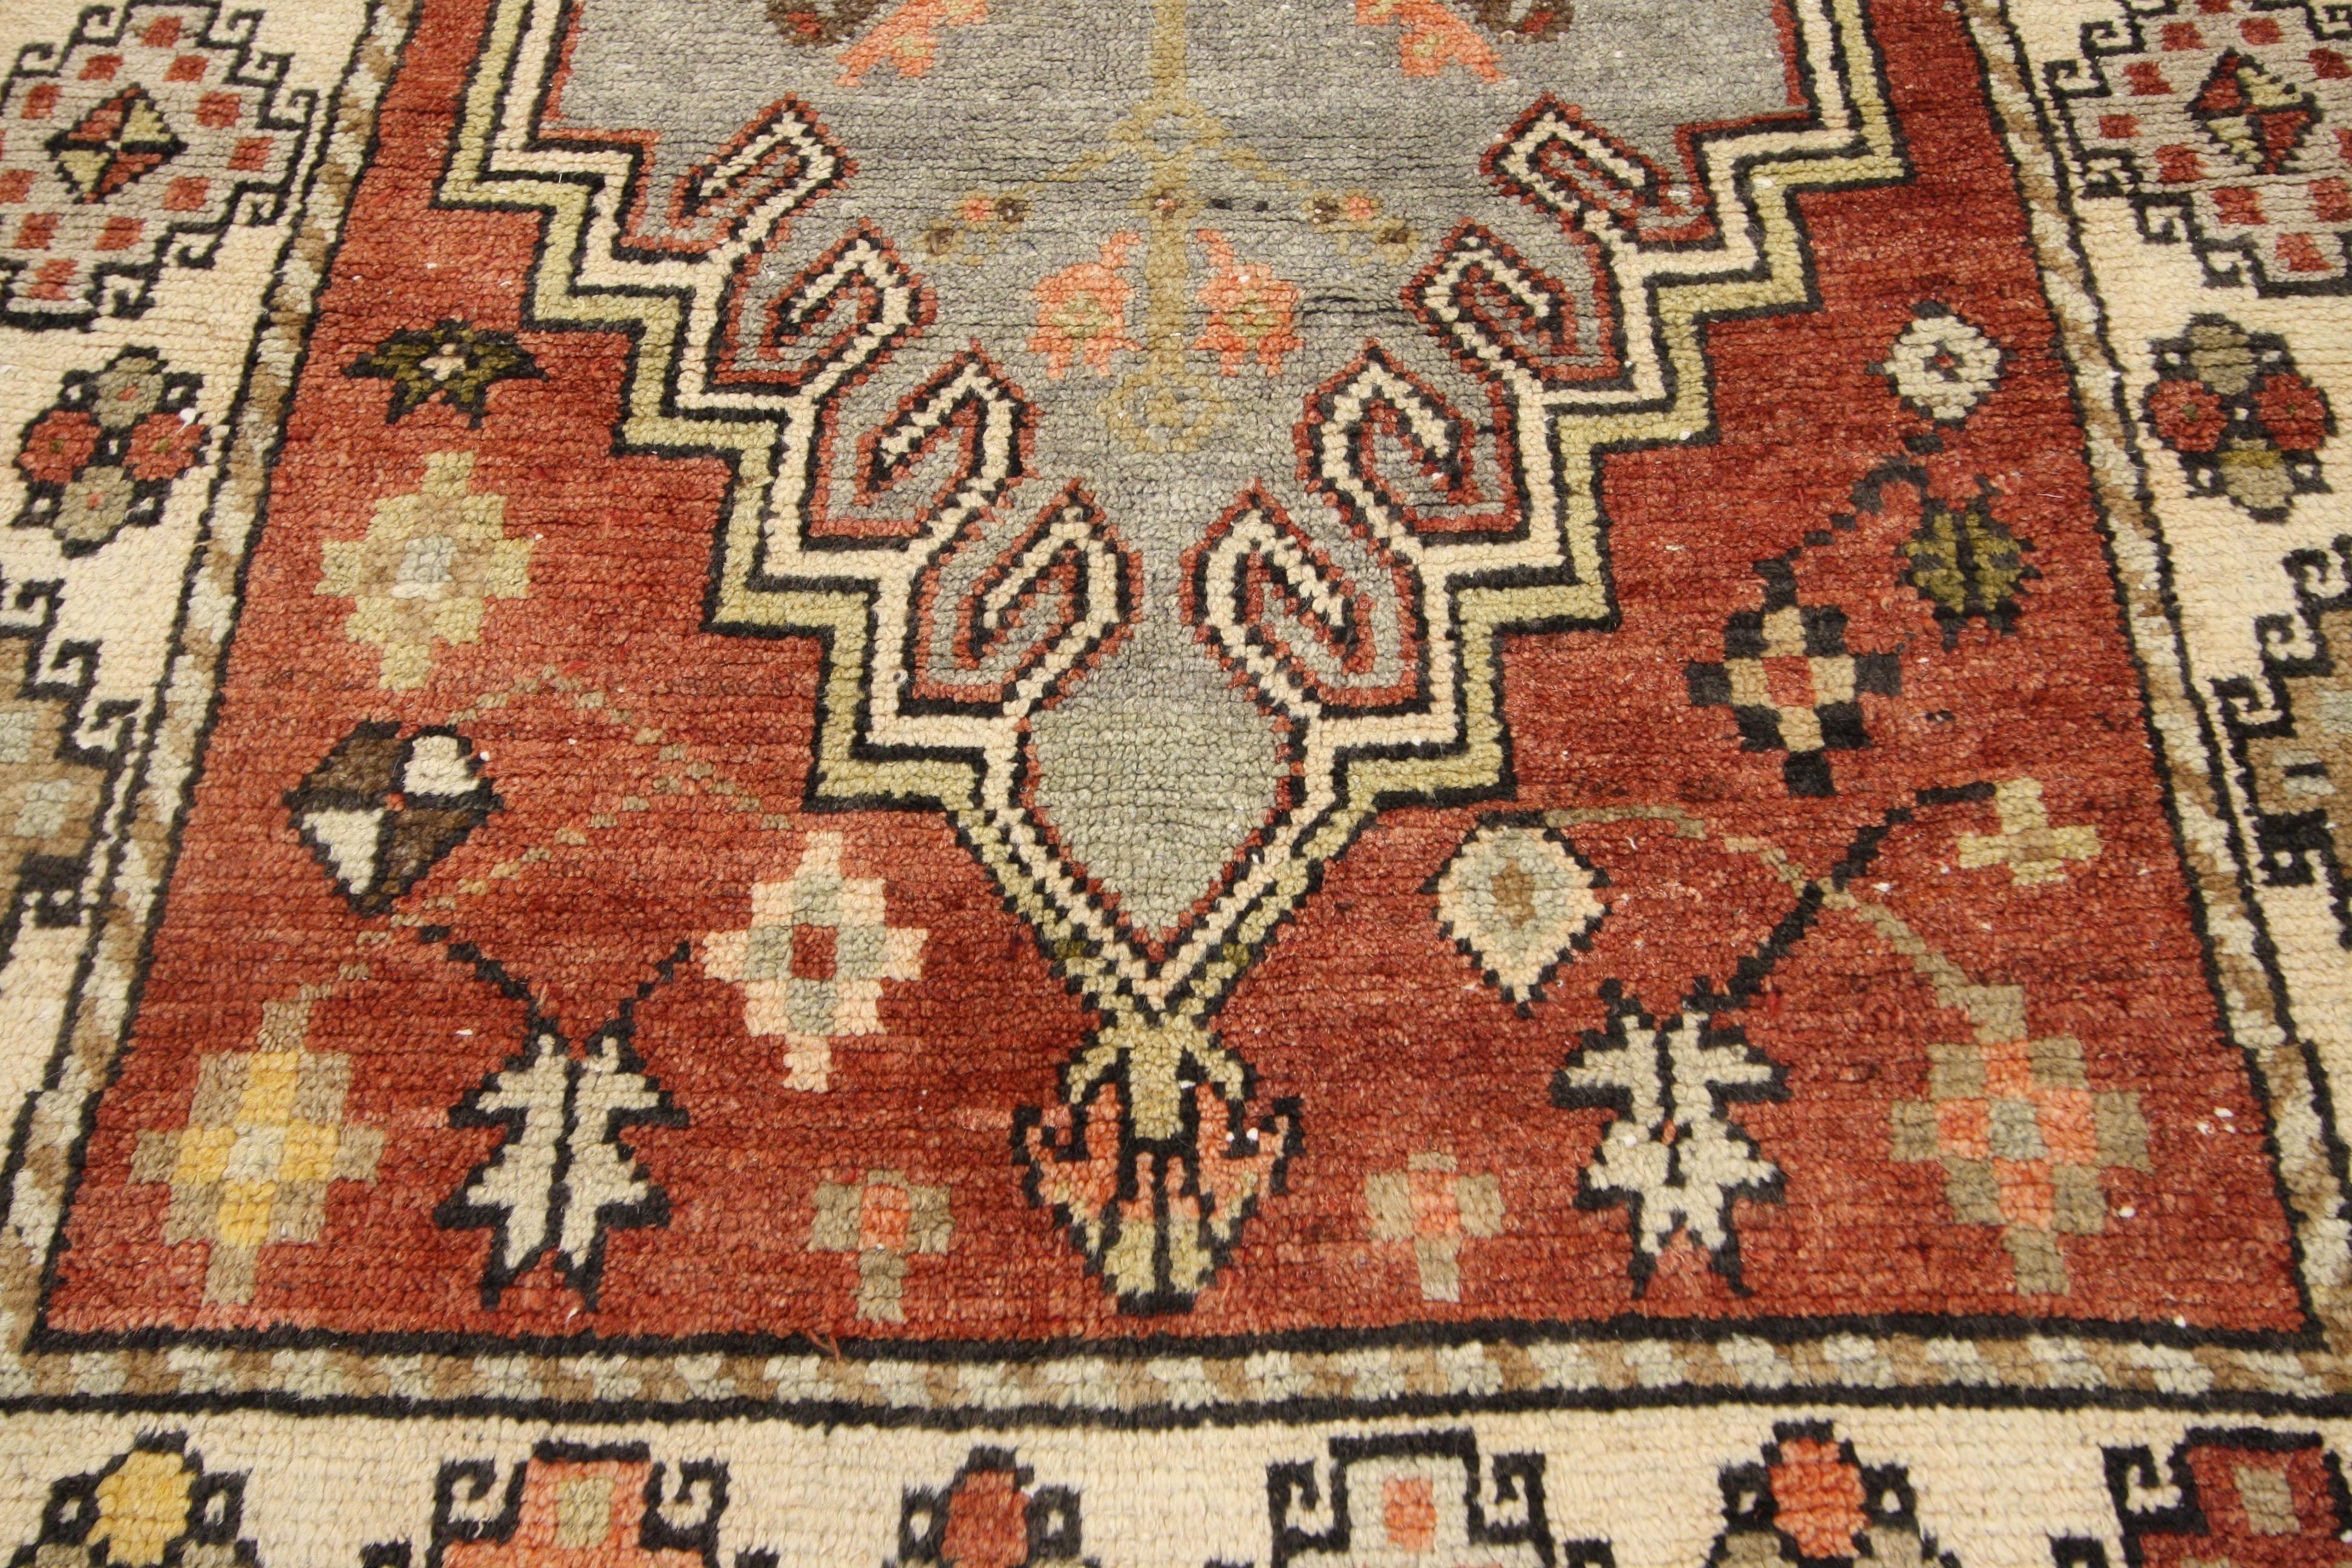 52406 rustic style vintage Turkish Oushak runner, hallway runner 03'04 x 09'06. This hand knotted wool vintage Turkish Oushak runner features two large stepped hexagonal medallions with interior latch-hooks and earring motifs. A variety of flowers